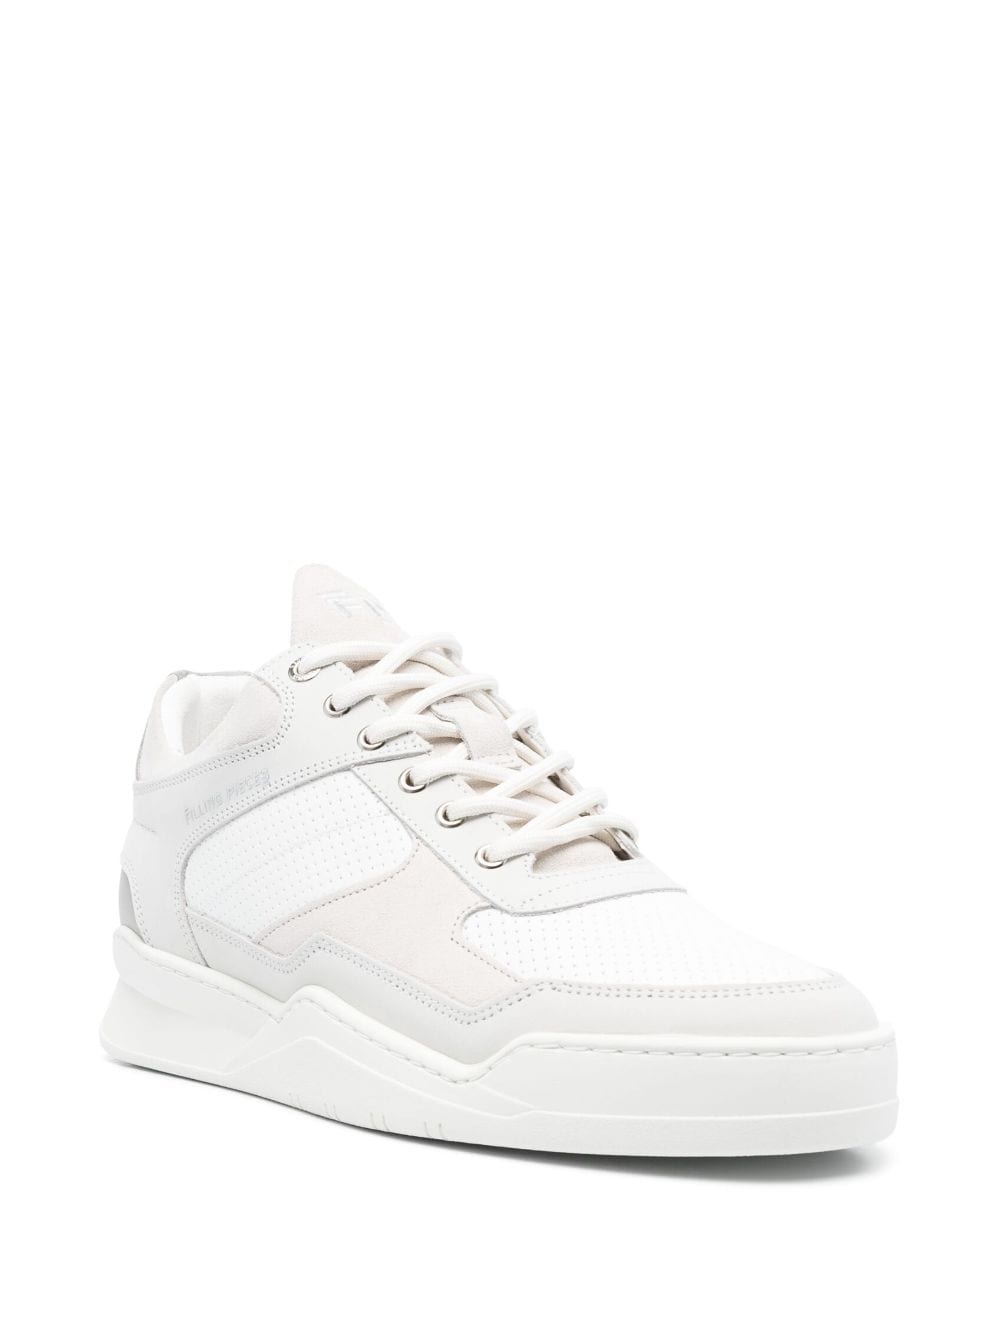 Image 2 of Filling Pieces panelled low-top sneakers